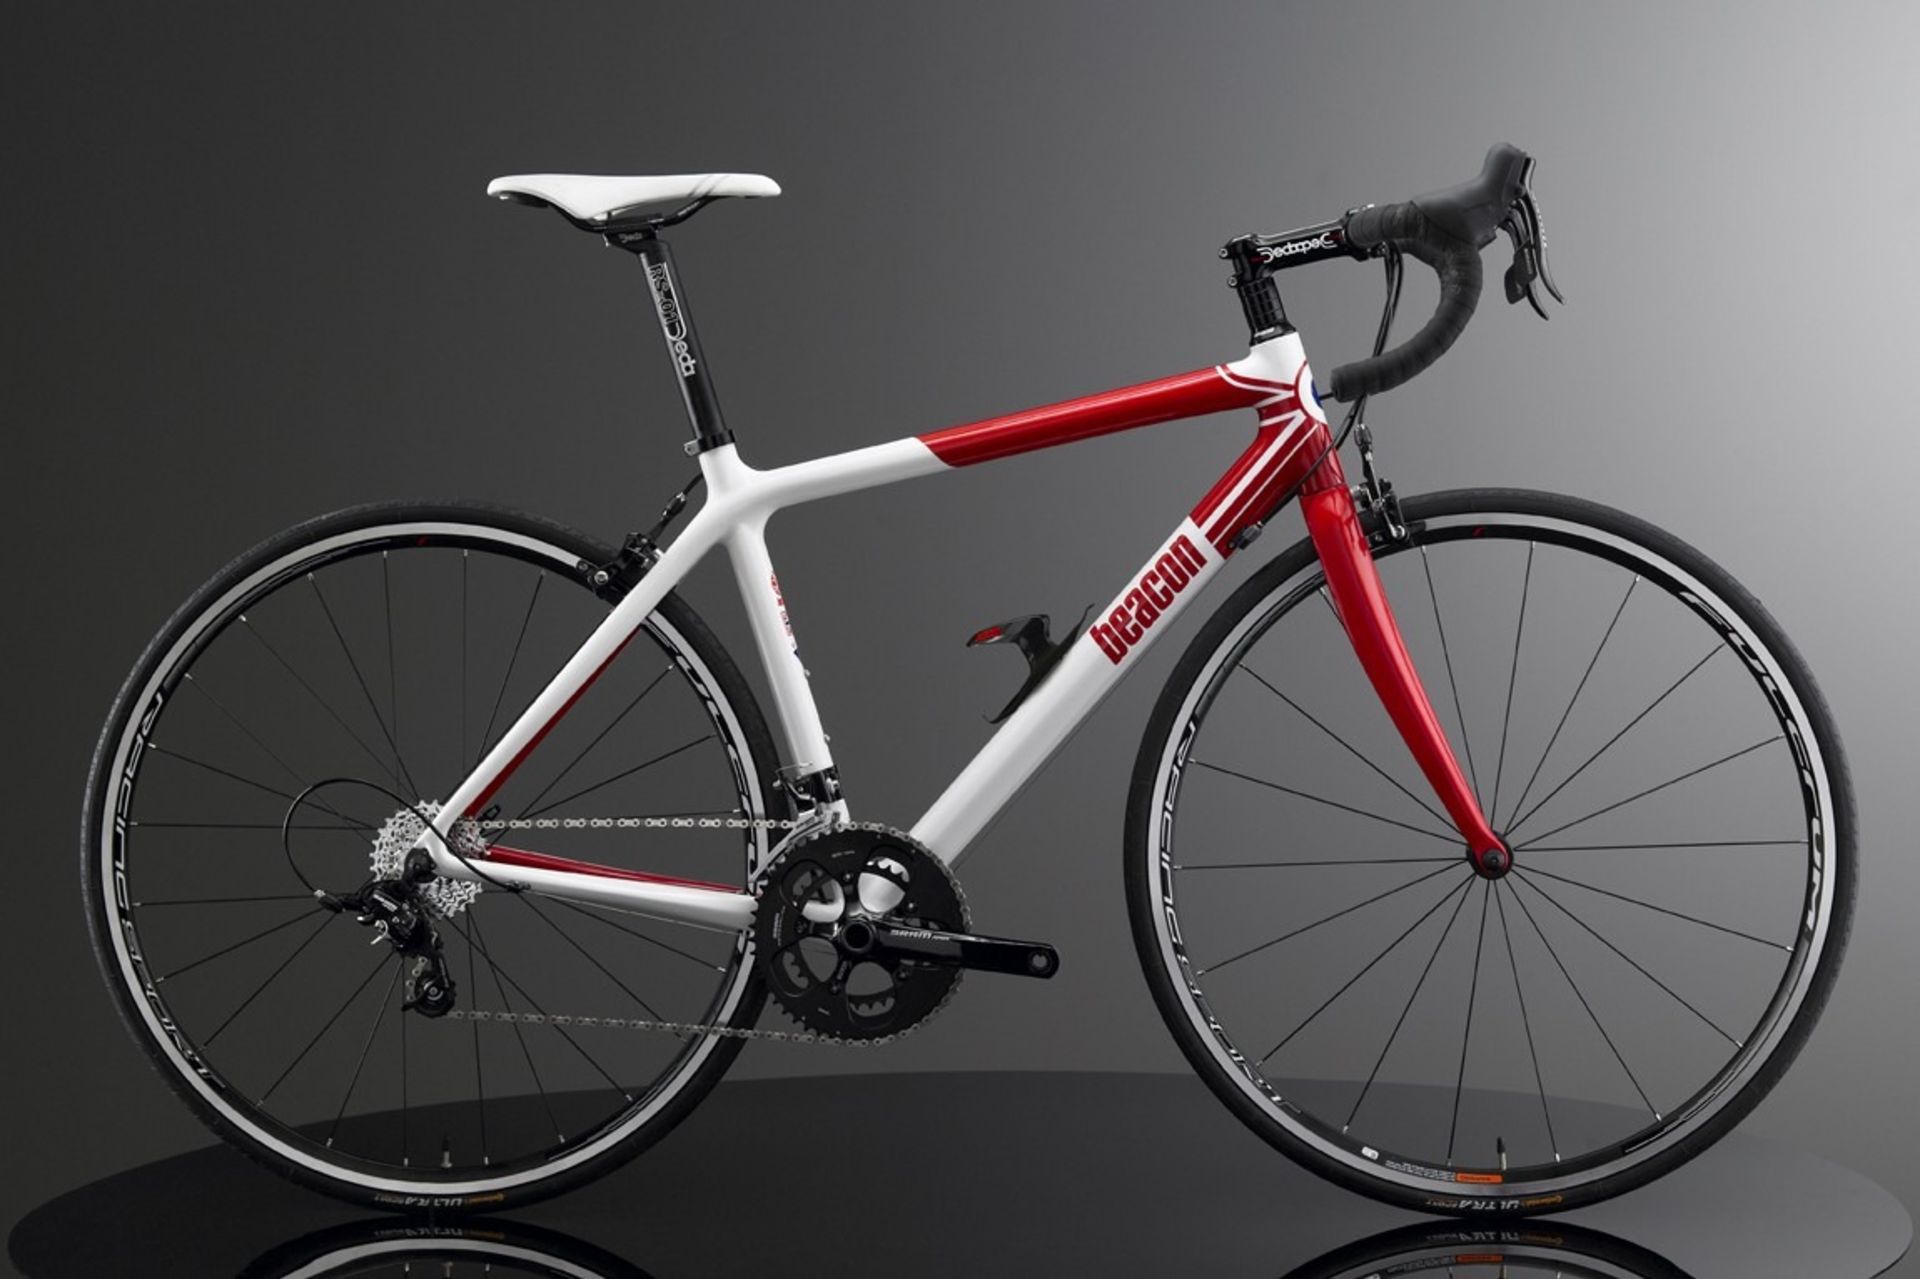 1 x Beacon Model BF-60, Size 520, Carbon Fibre Bike Frame in White & Red . - Image 2 of 3